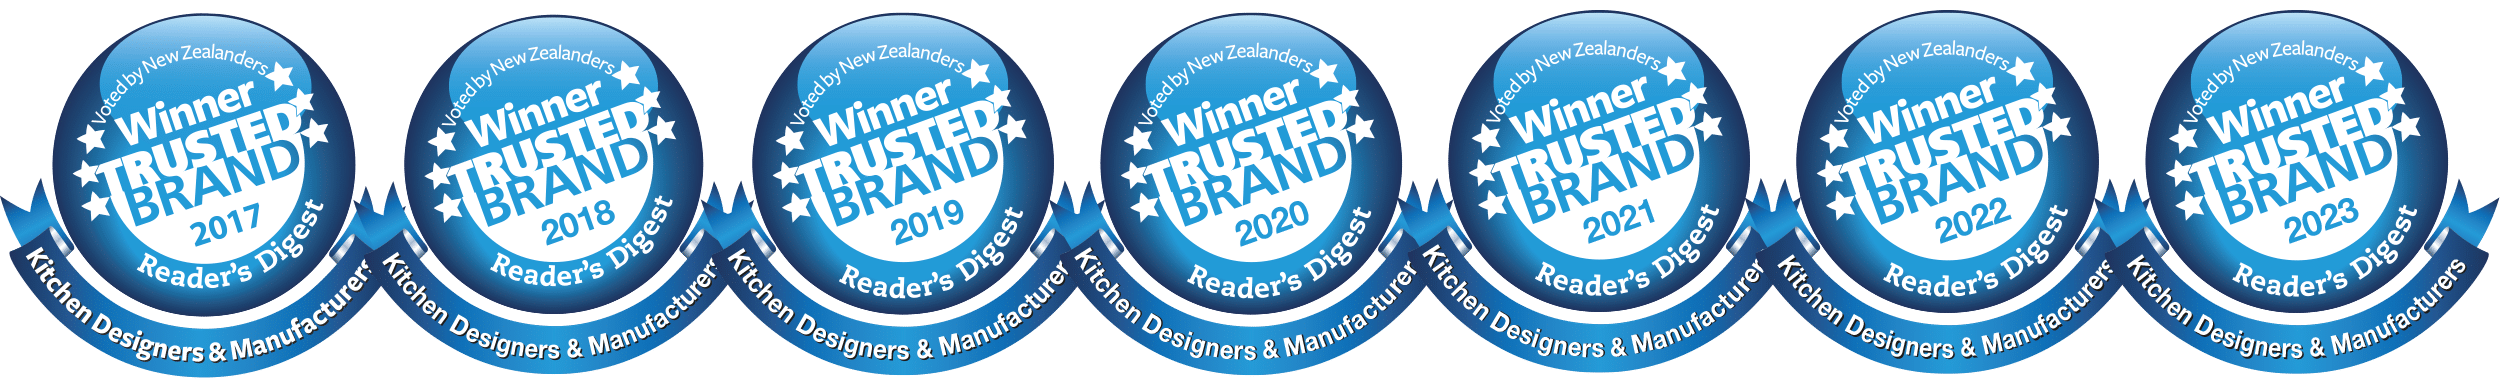 Voted New Zealand's most trusted kitchen brand for the seventh year running